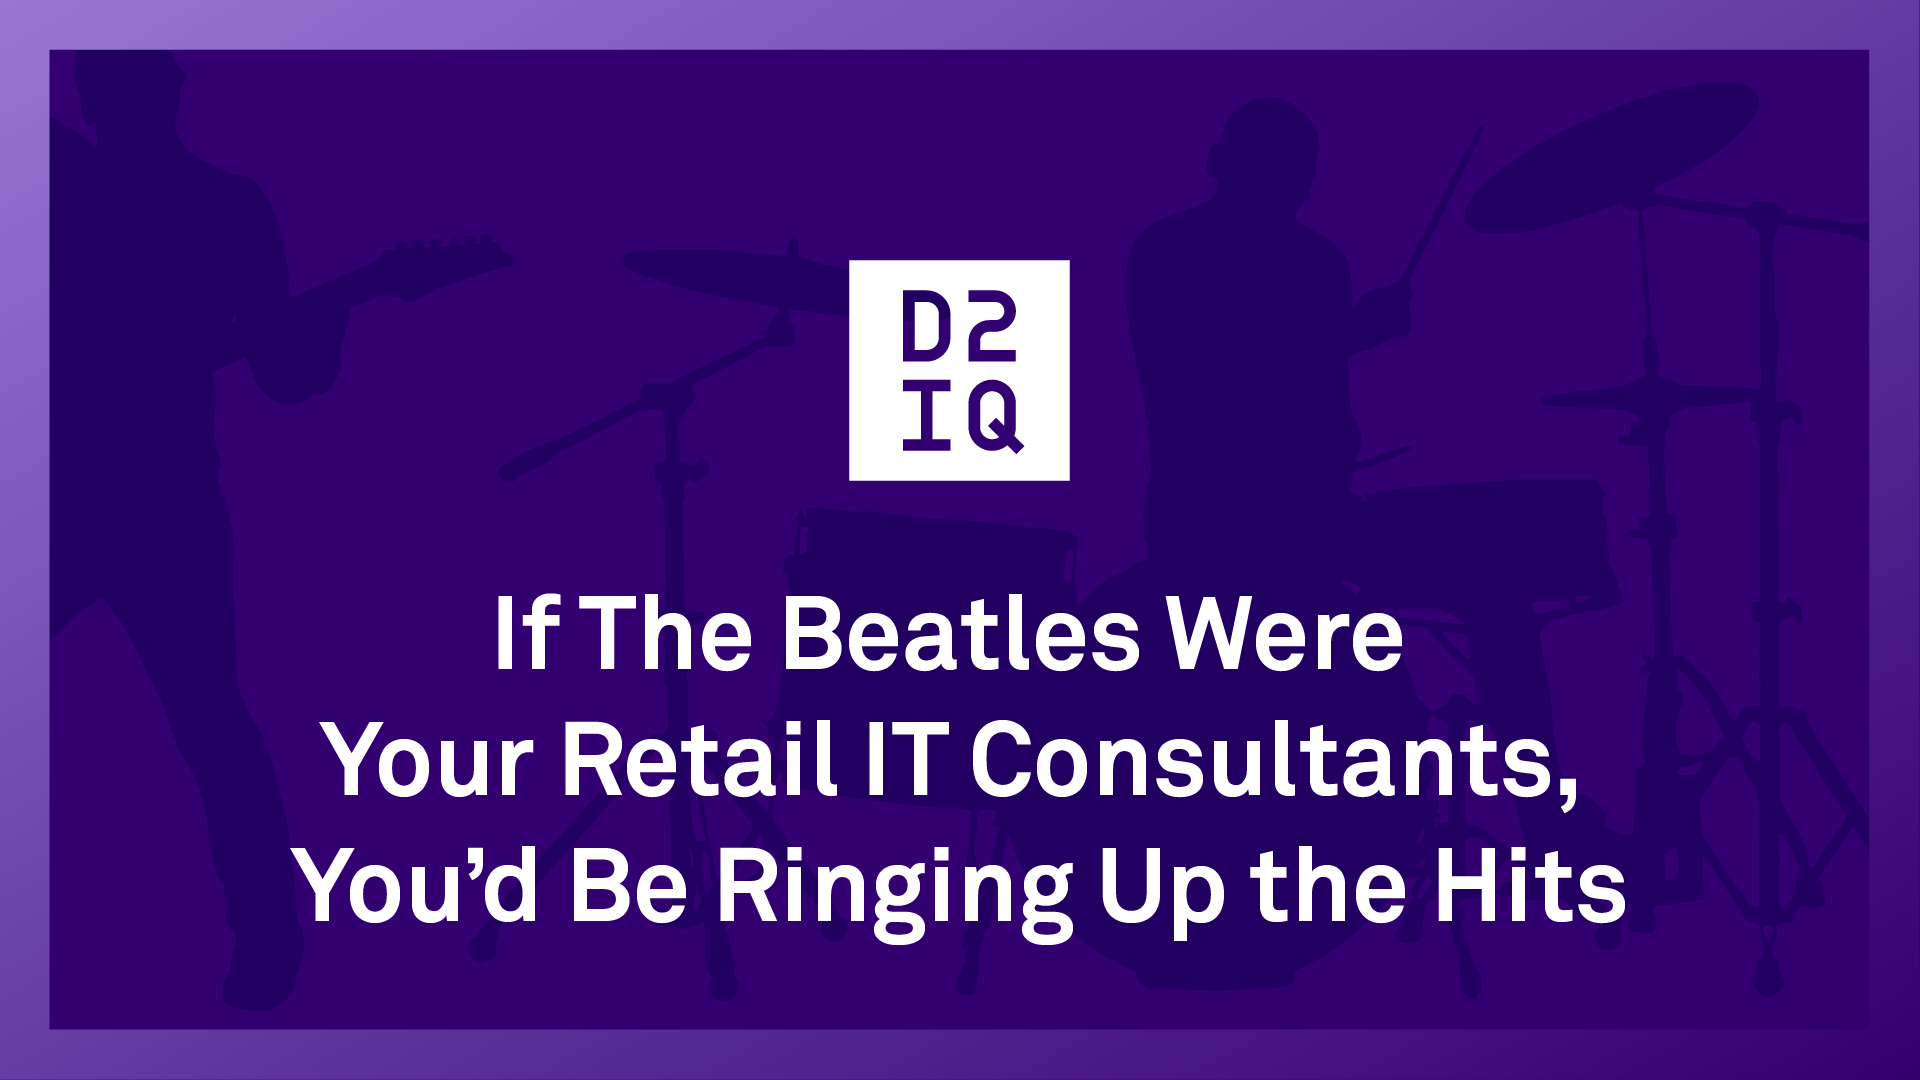 If The Beatles Were Your Retail IT Consultants, You’d Be Ringing Up the Hits